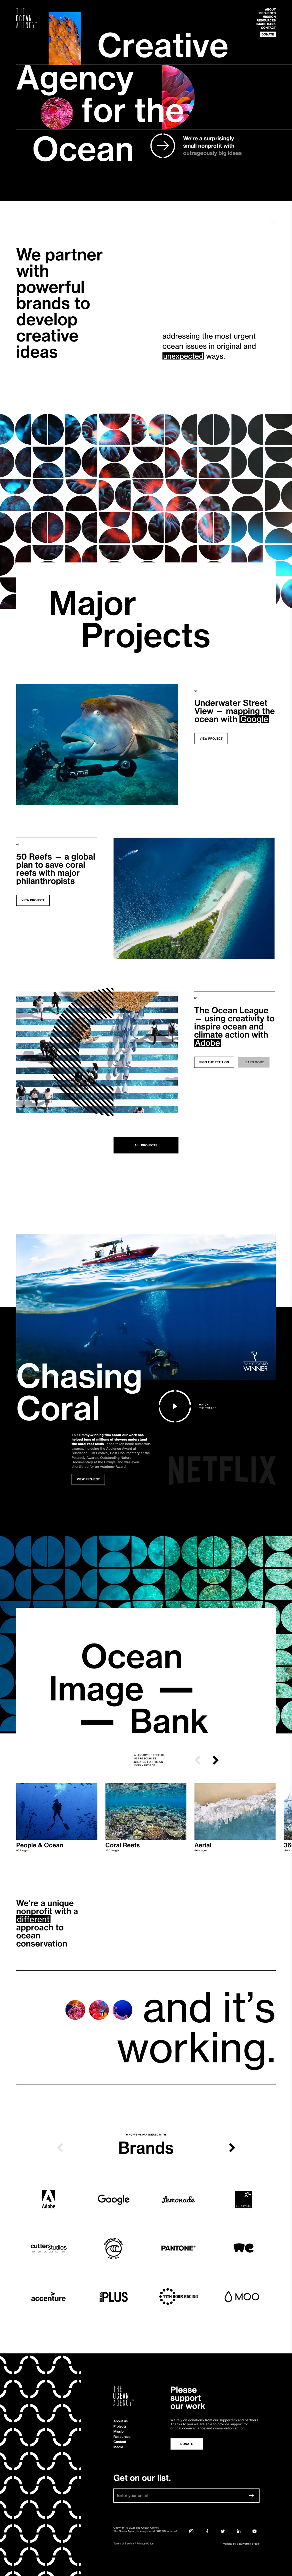 The Ocean Agency Landing Page Example: We address the most urgent ocean issues in original and unexpected ways.